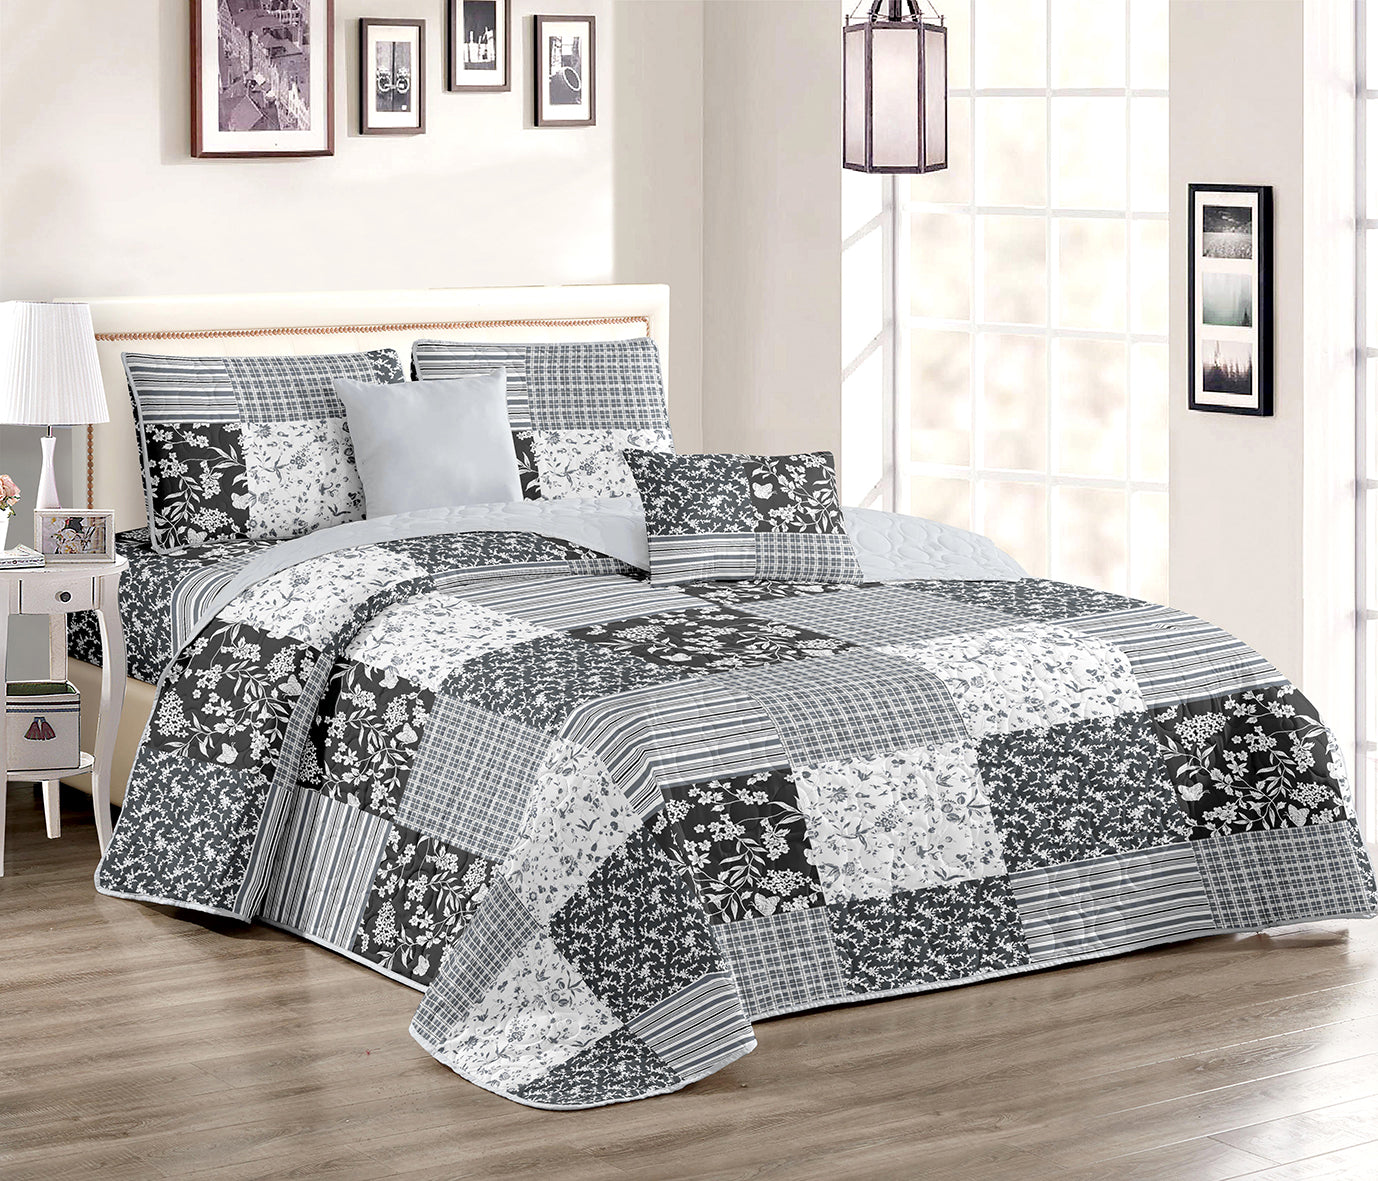 WongsBedding Brown Floral Patchwork Quilt Set With 2 Pillowcases